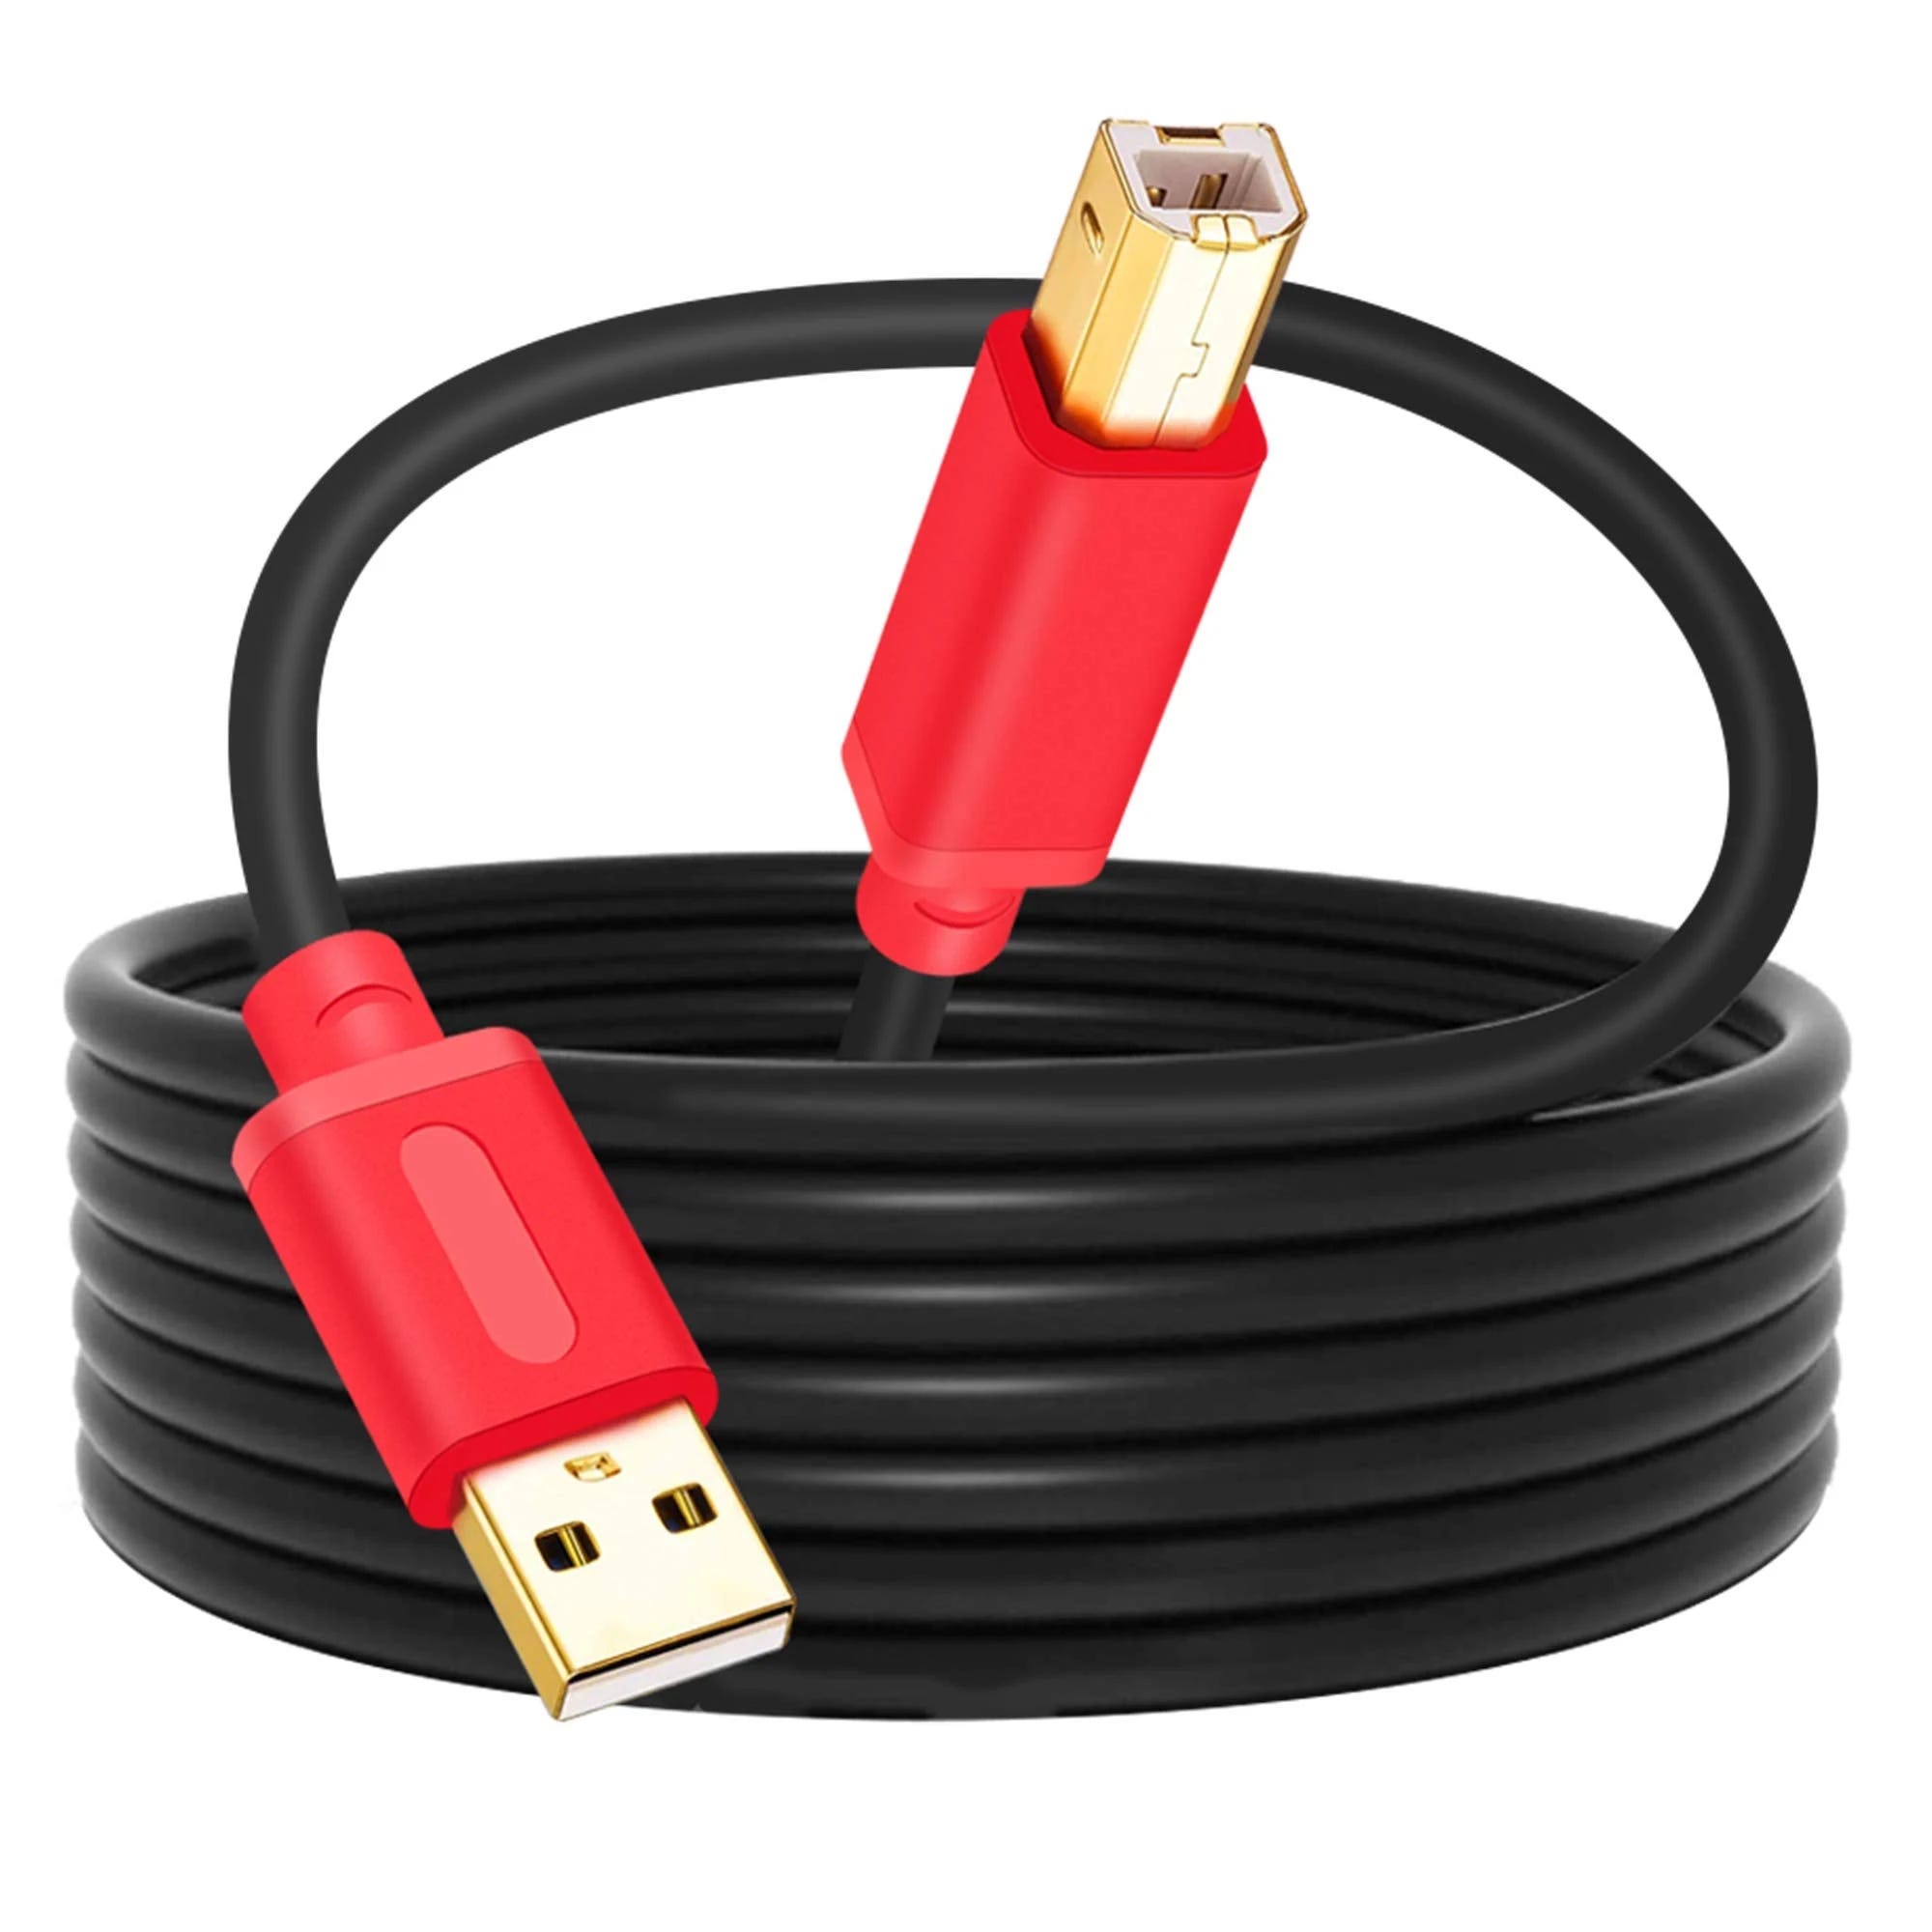 USB 2.0 High-Speed Printer Cable for HP, Canon, Lexmark, Dell, Xerox, and More | Image